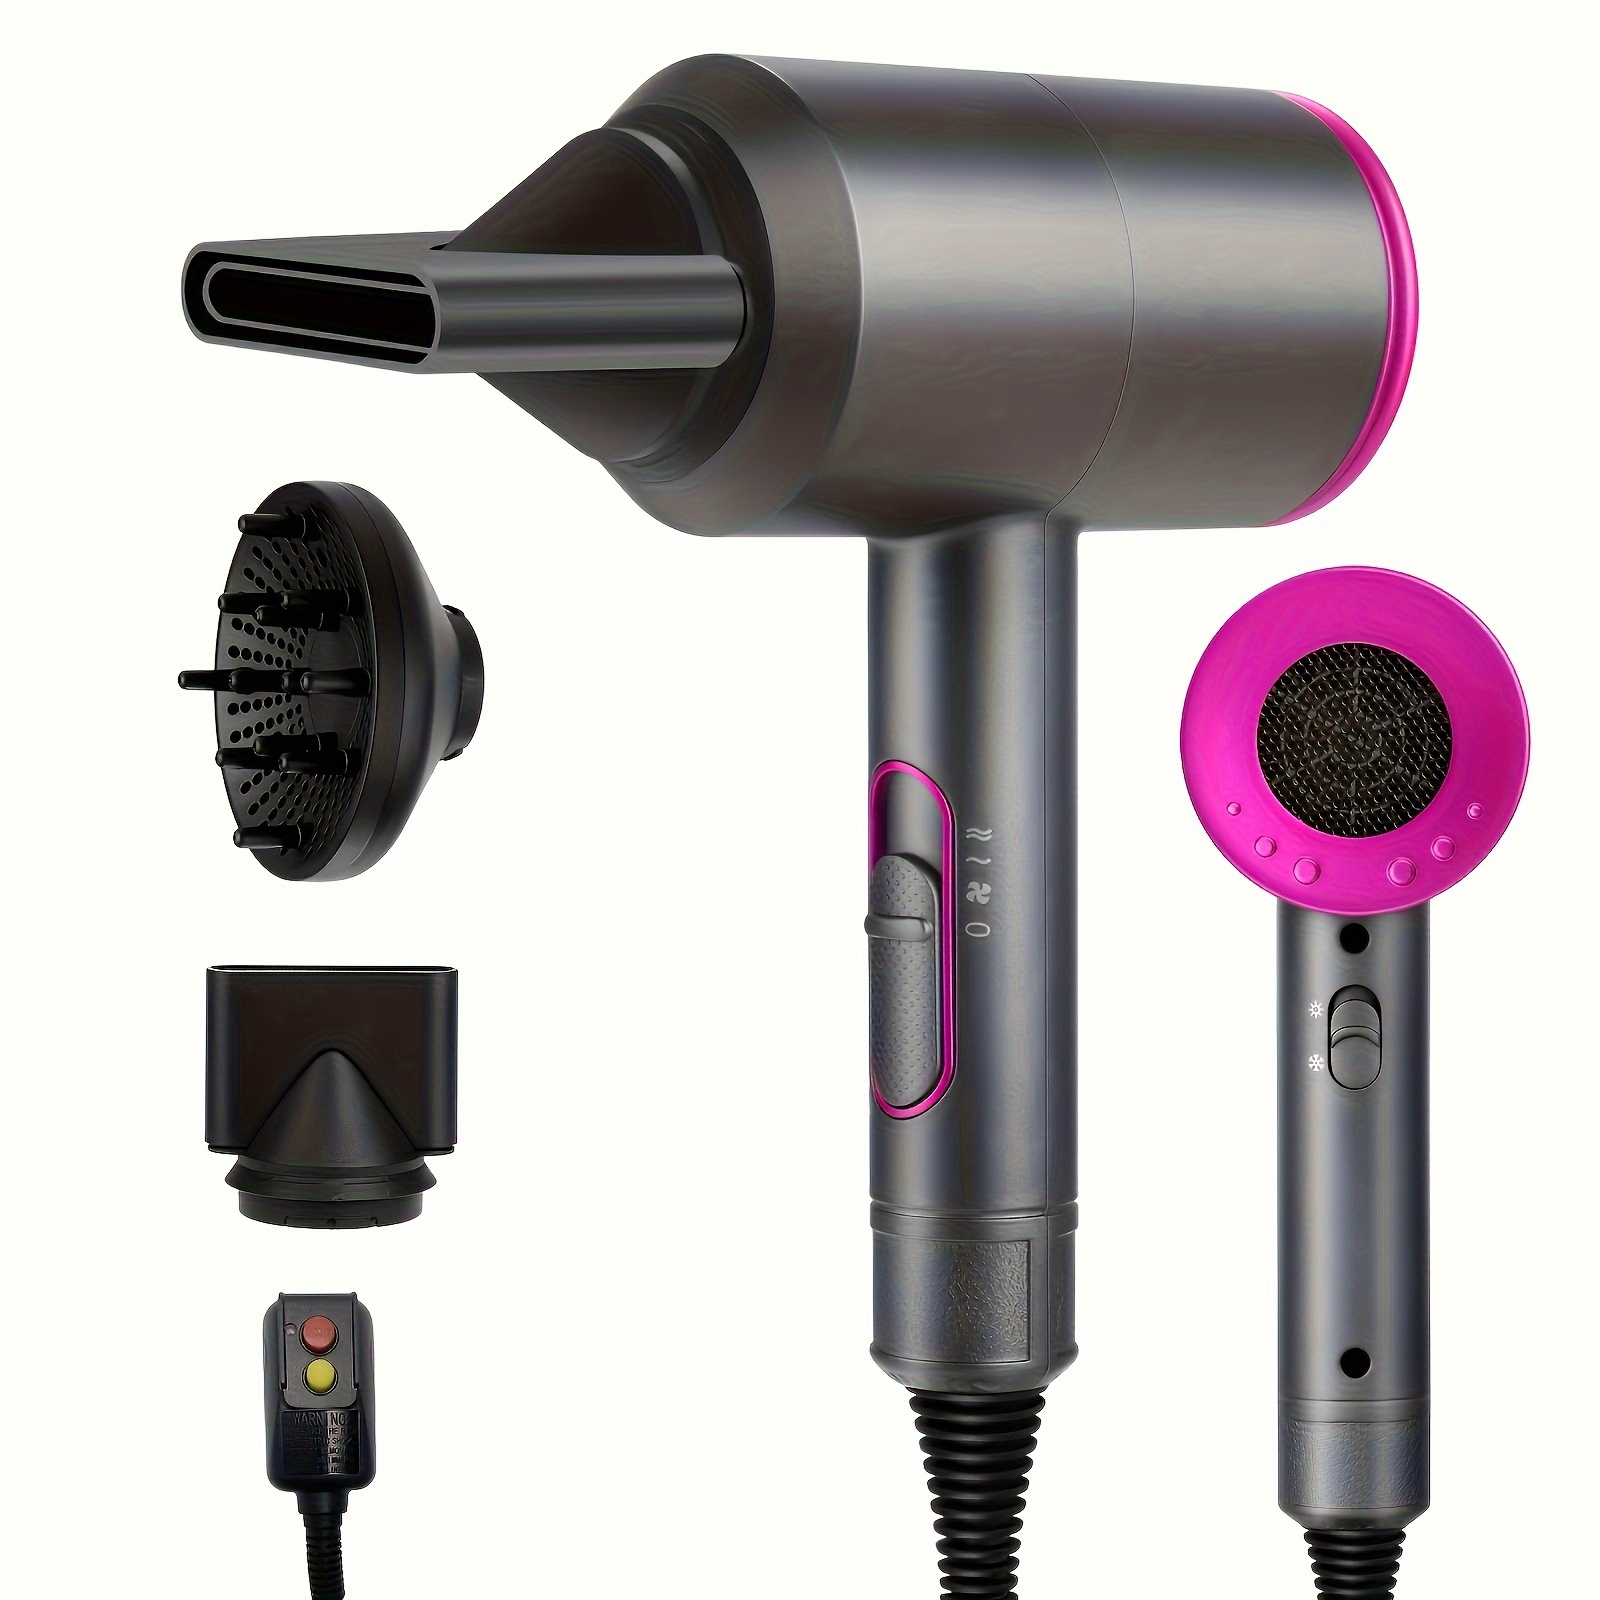 

Professional Ionic Hair Dryer With Diffuser - Fast Blow Dryer For Healthy, Damage-free Hair Care